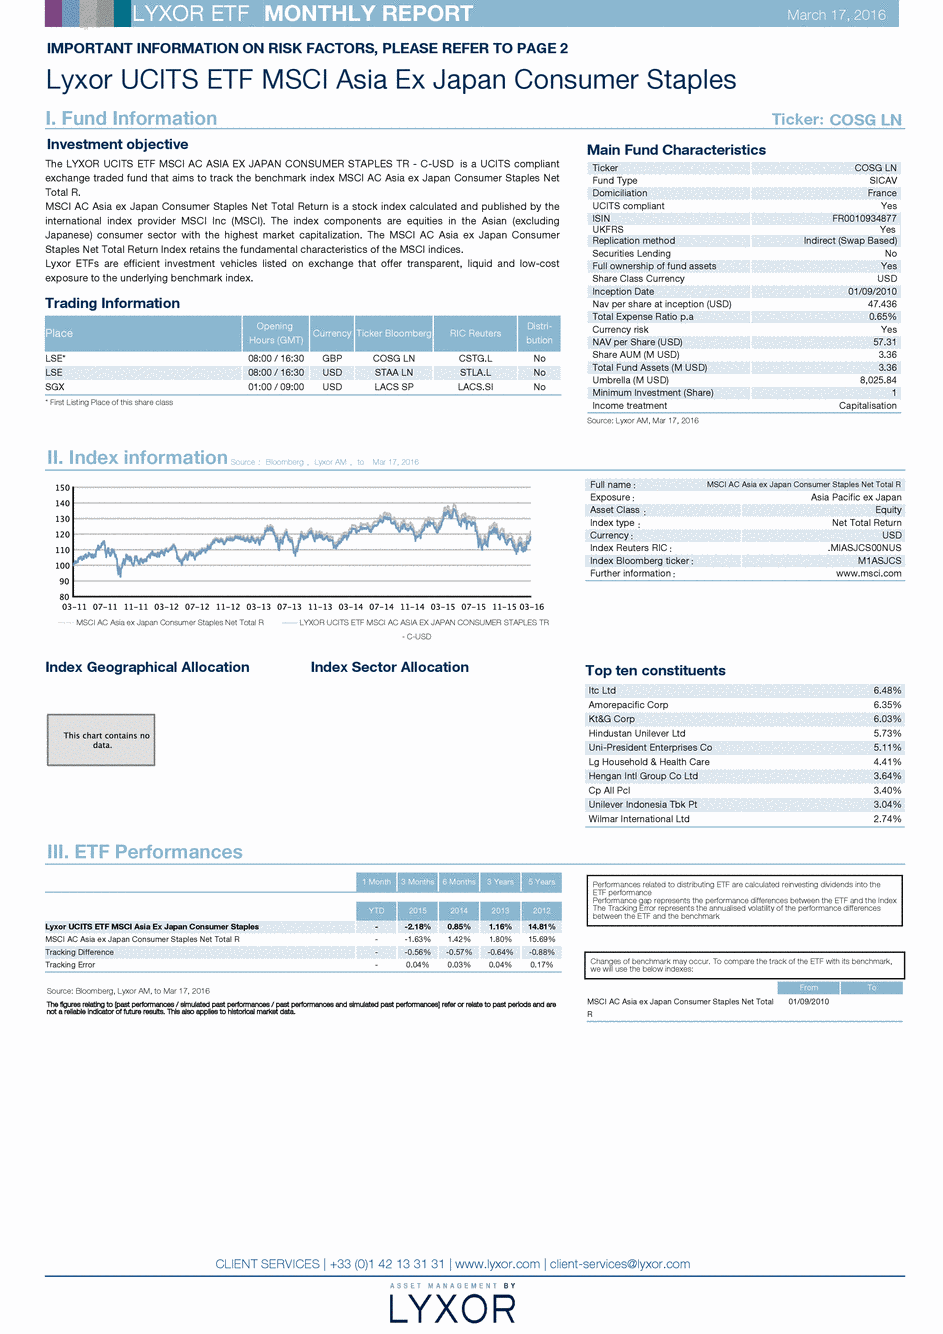 Reporting LYXOR UCITS ETF MSCI AC ASIA EX JAPAN CONSUMER STAPLES TR C USD - 17/03/2016 - Anglais